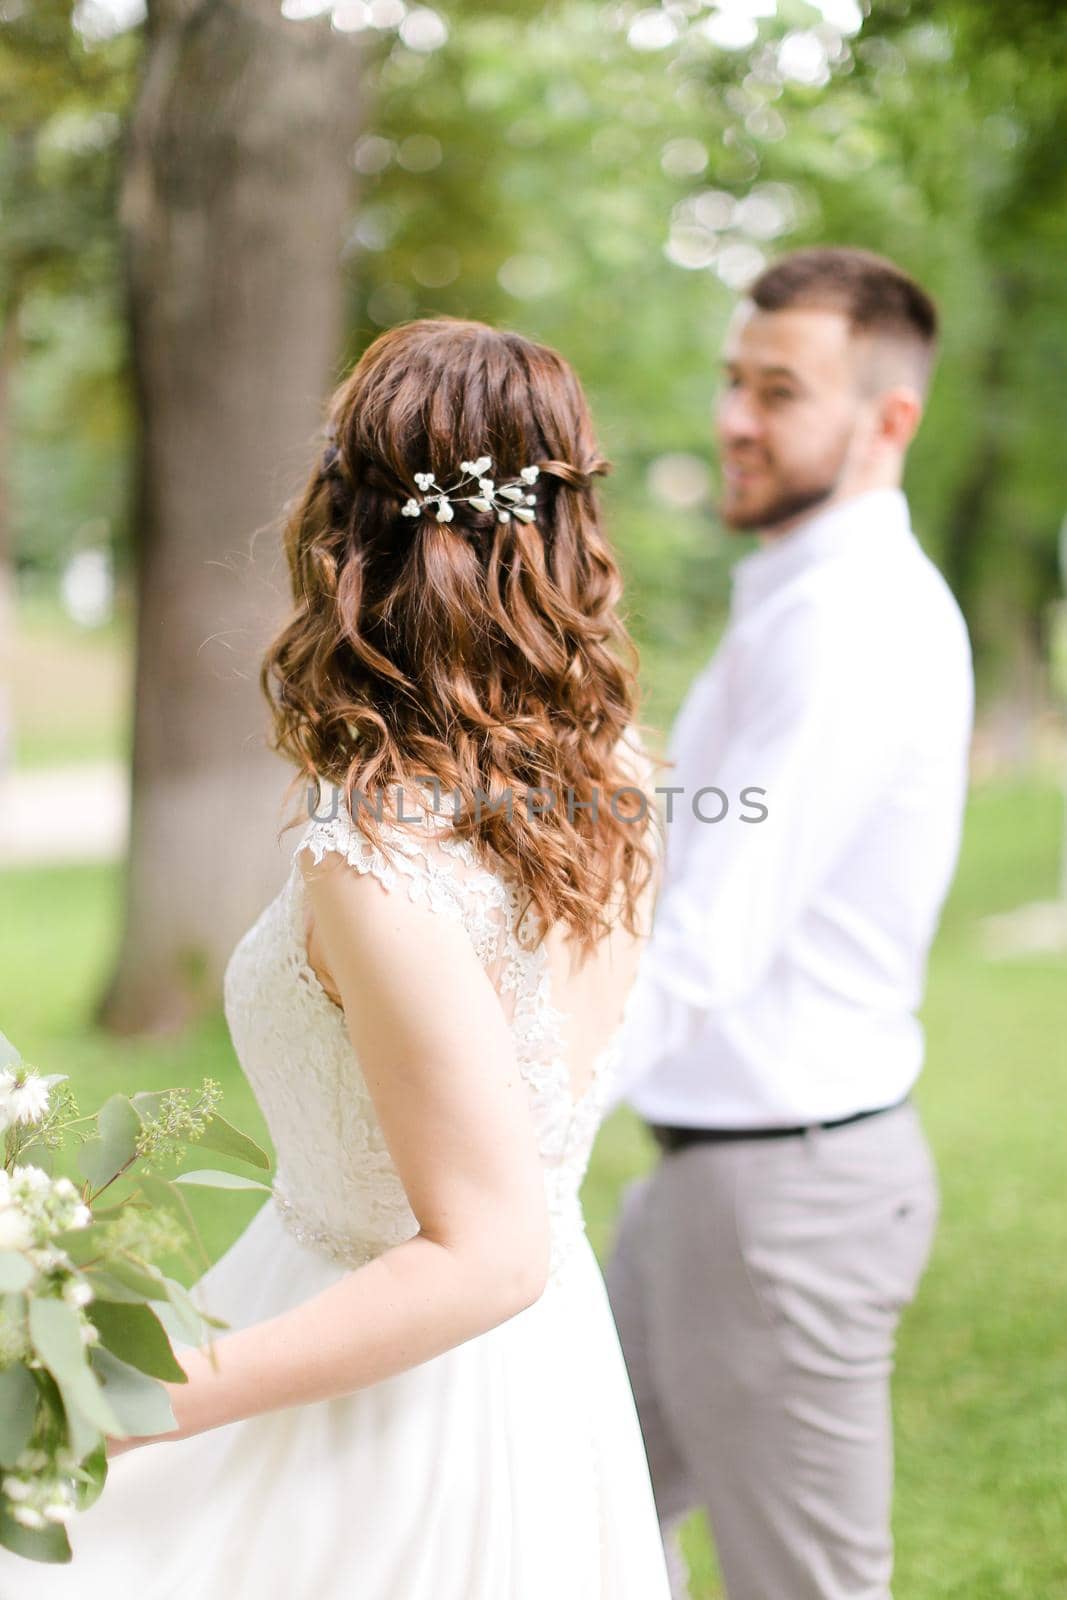 Caucasian happy fiancee walking with groom and bouquet of flowers. Concept of bridal photo session and married couple.